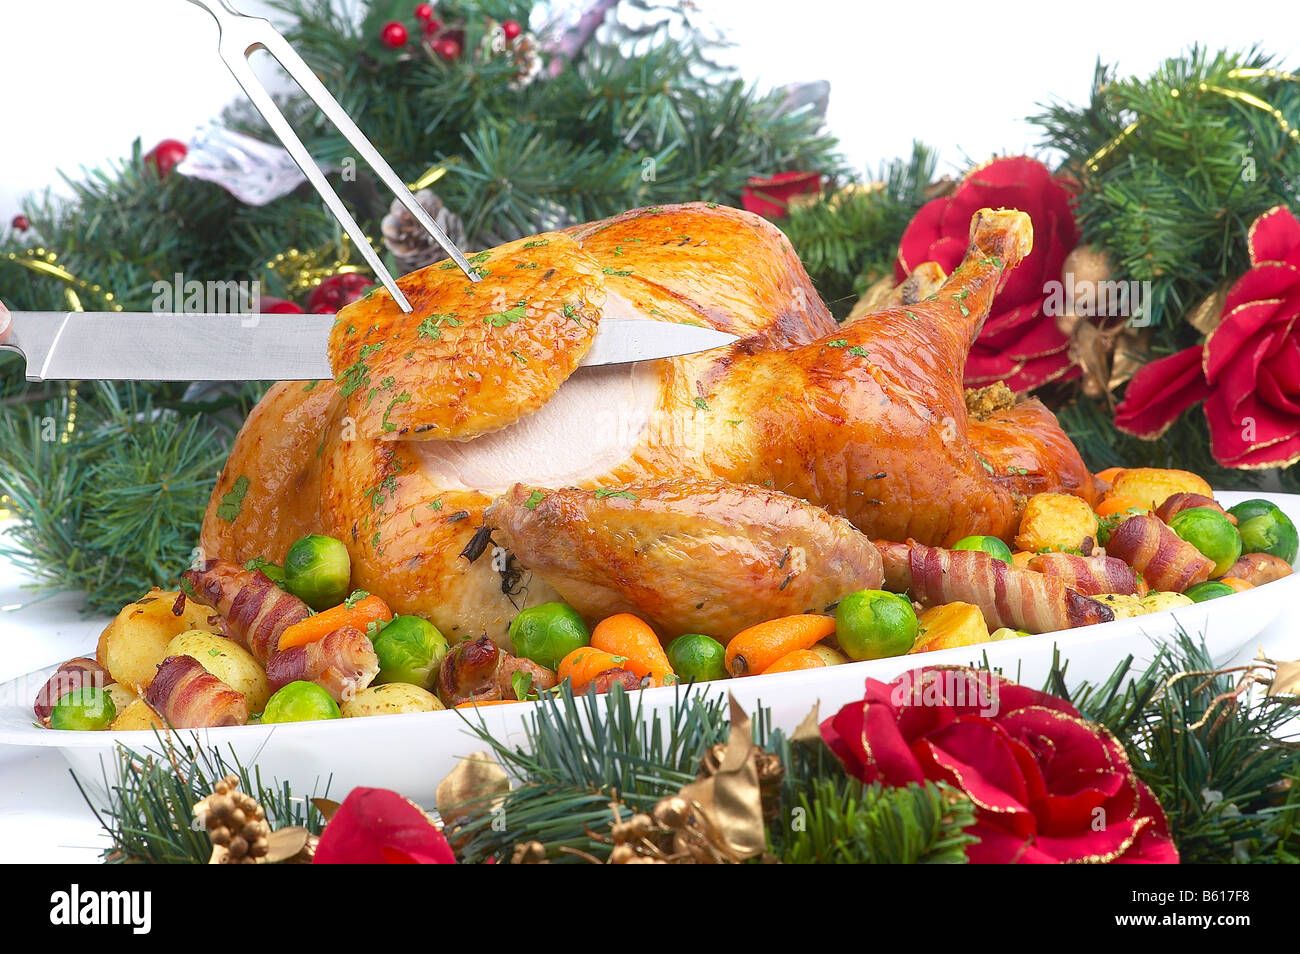 CHRISTMAS TURKEY DINNER WITH VEGETABLES Stock Photo